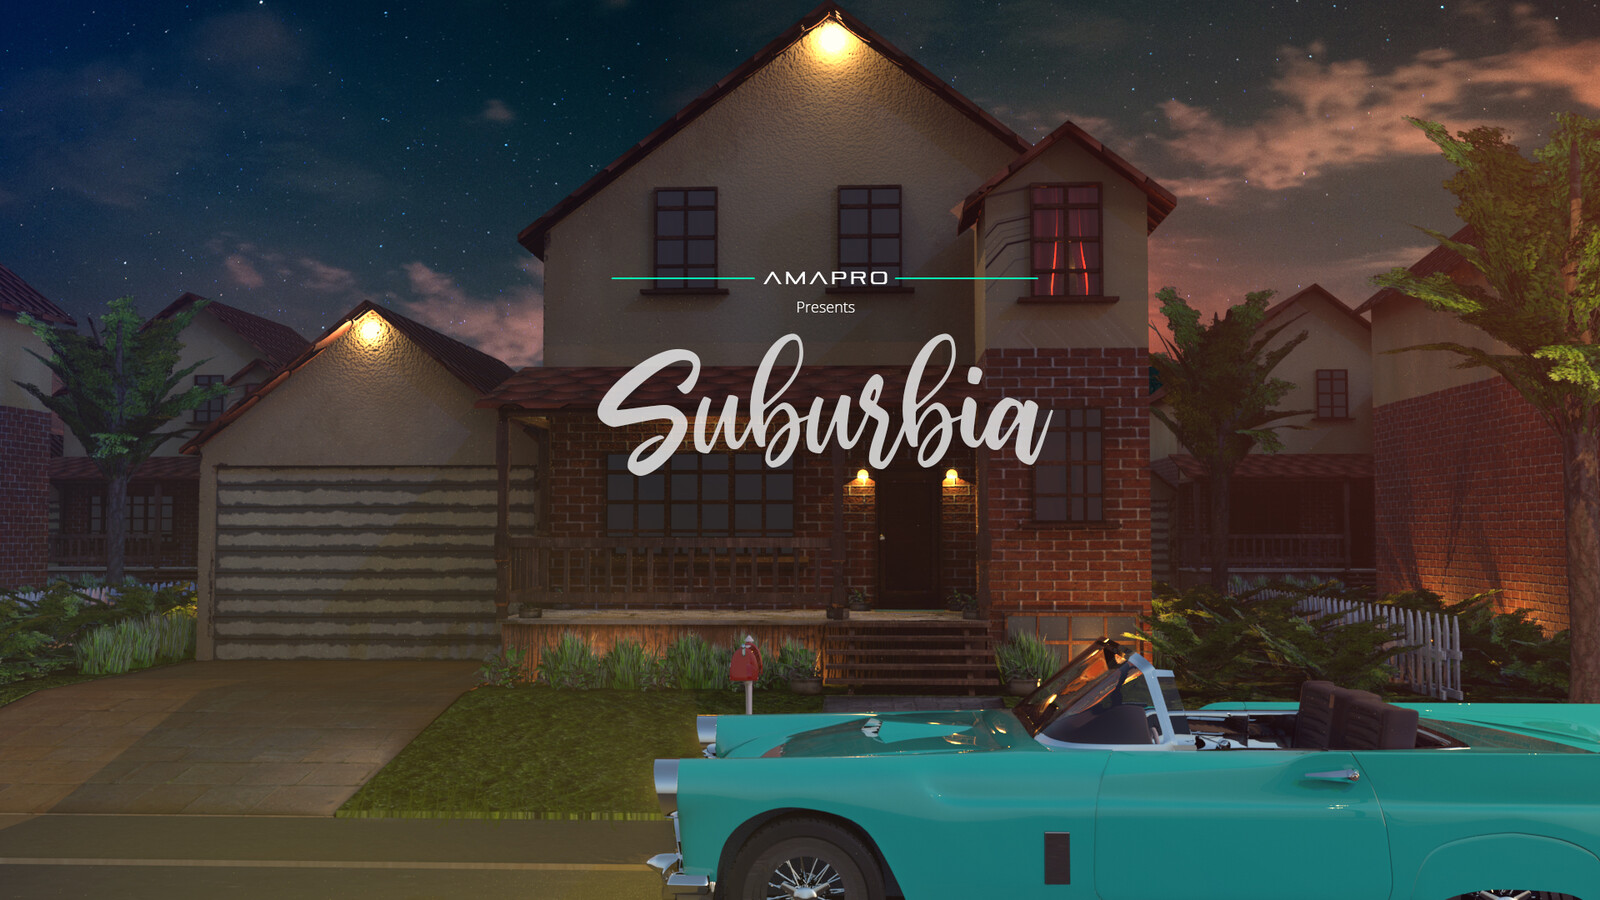 scene composition i did for my groups upcoming short film "suburbia". modeled by Benson, Iliana, Ring and Yuto.
uv, textures, rendered and composition by me